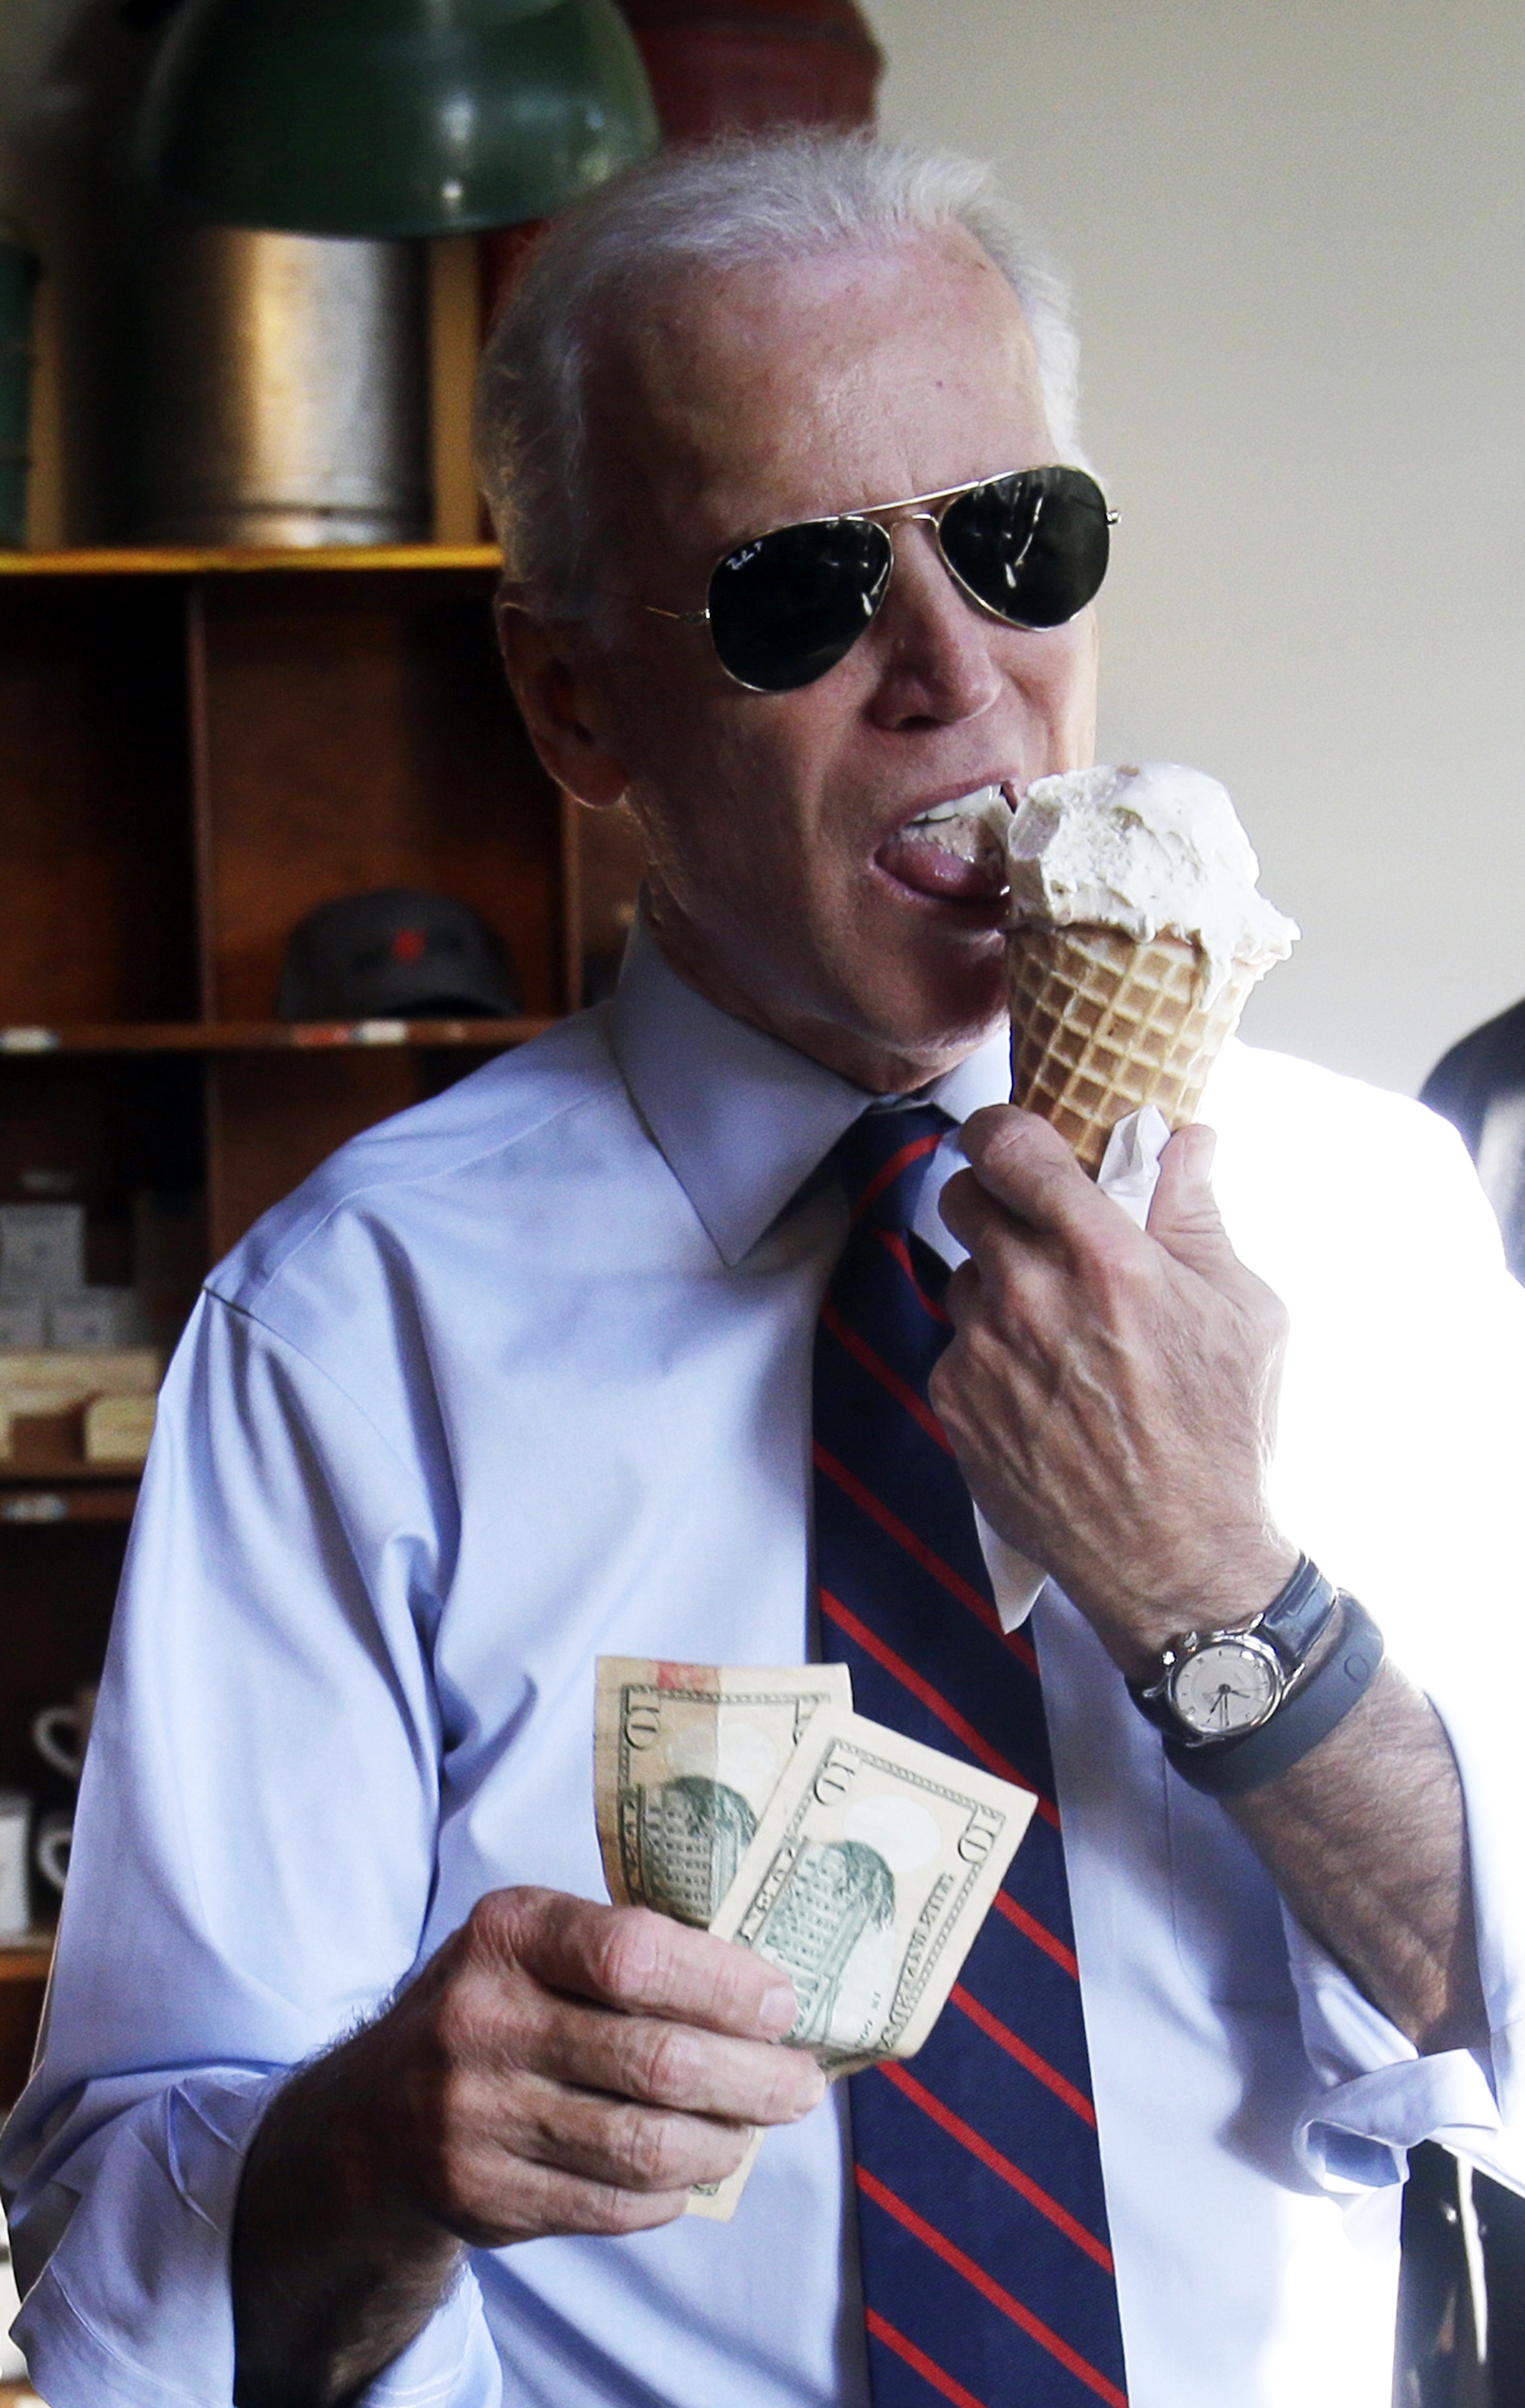 Vice President Joe Biden gets ready to pay for an ice cream cone after a campaign rally for U.S. Sen.  Jeff Merkley in Portland, Ore. on Oct. 8, 2014.